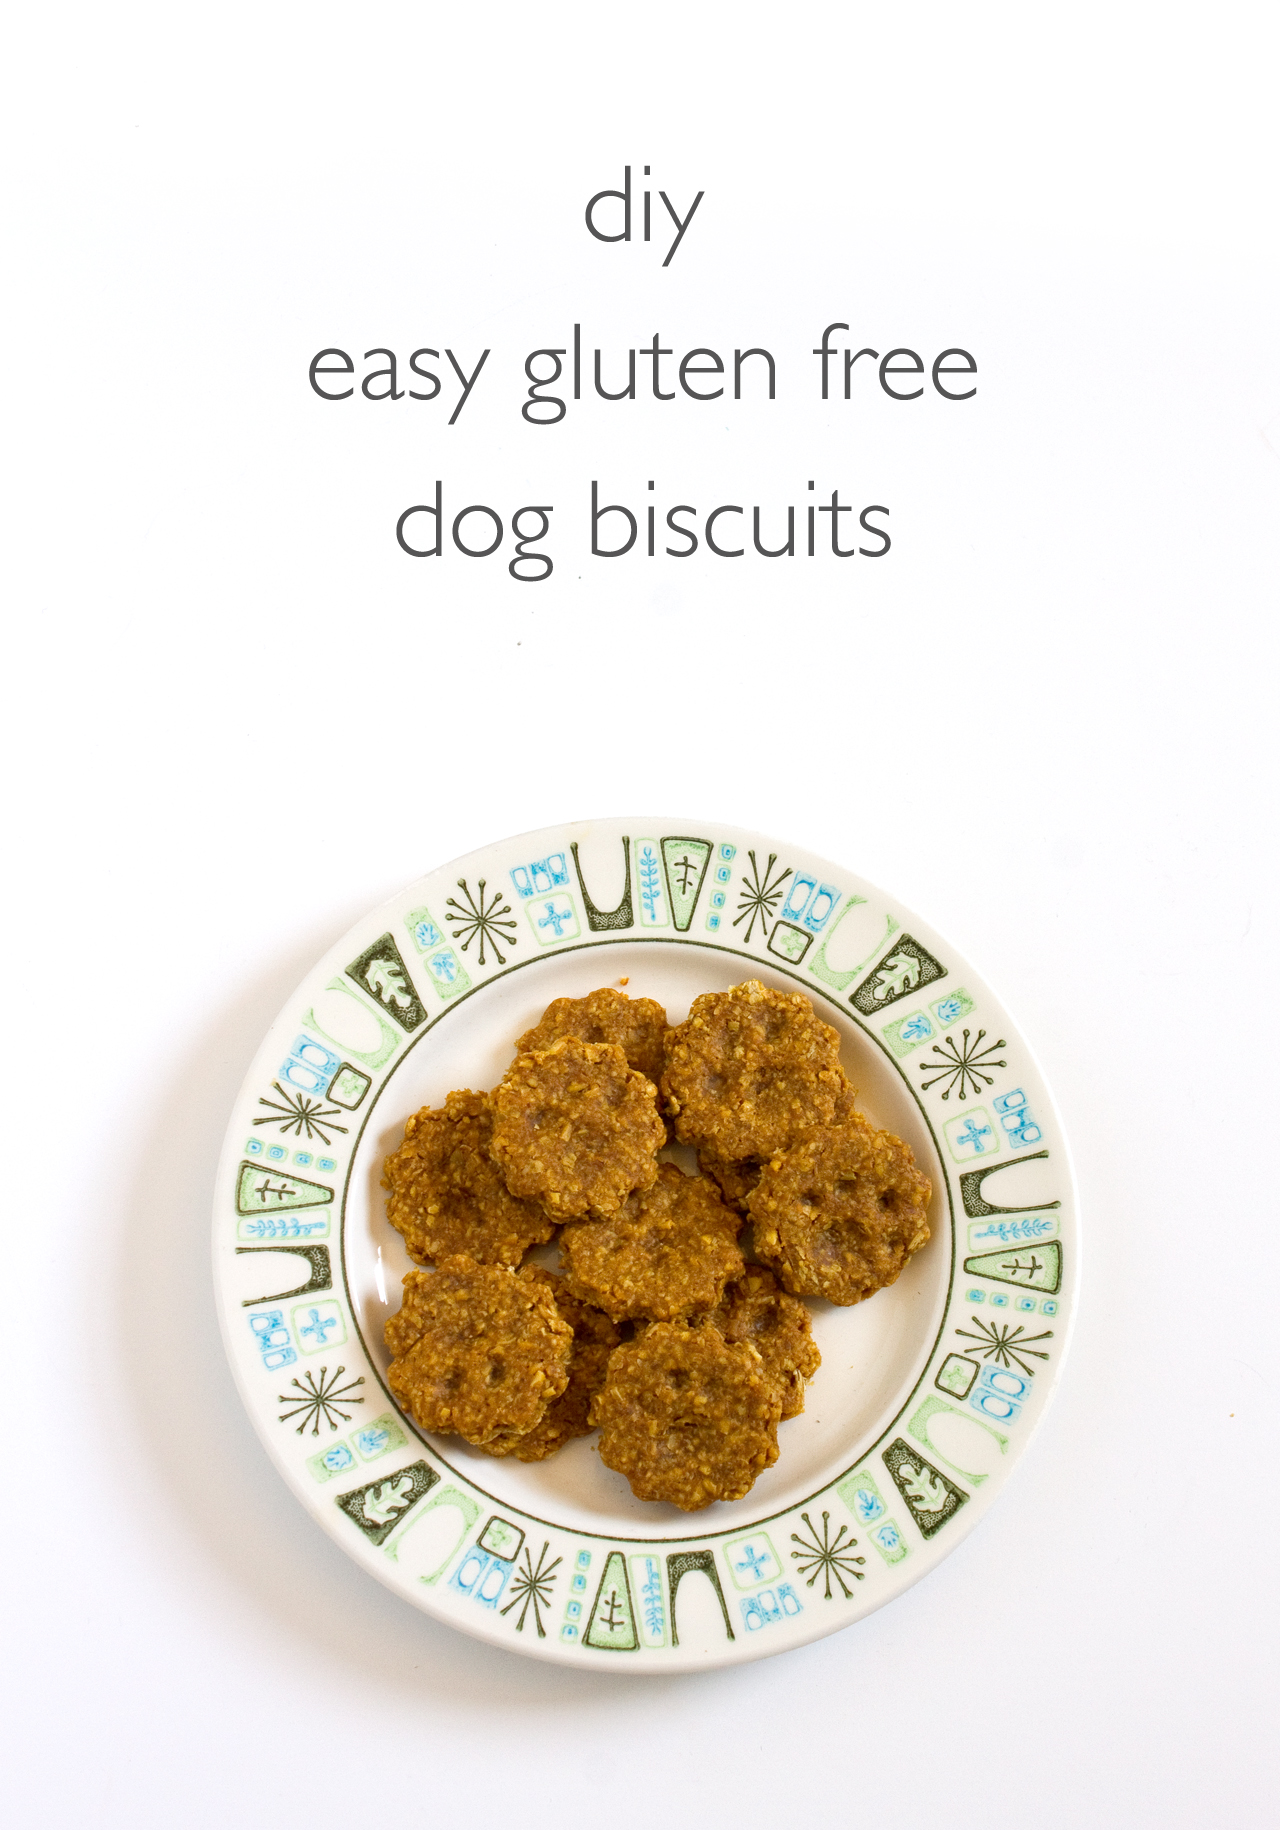 DIY Easy Gluten Free Dog Biscuits | click through for the recipe!